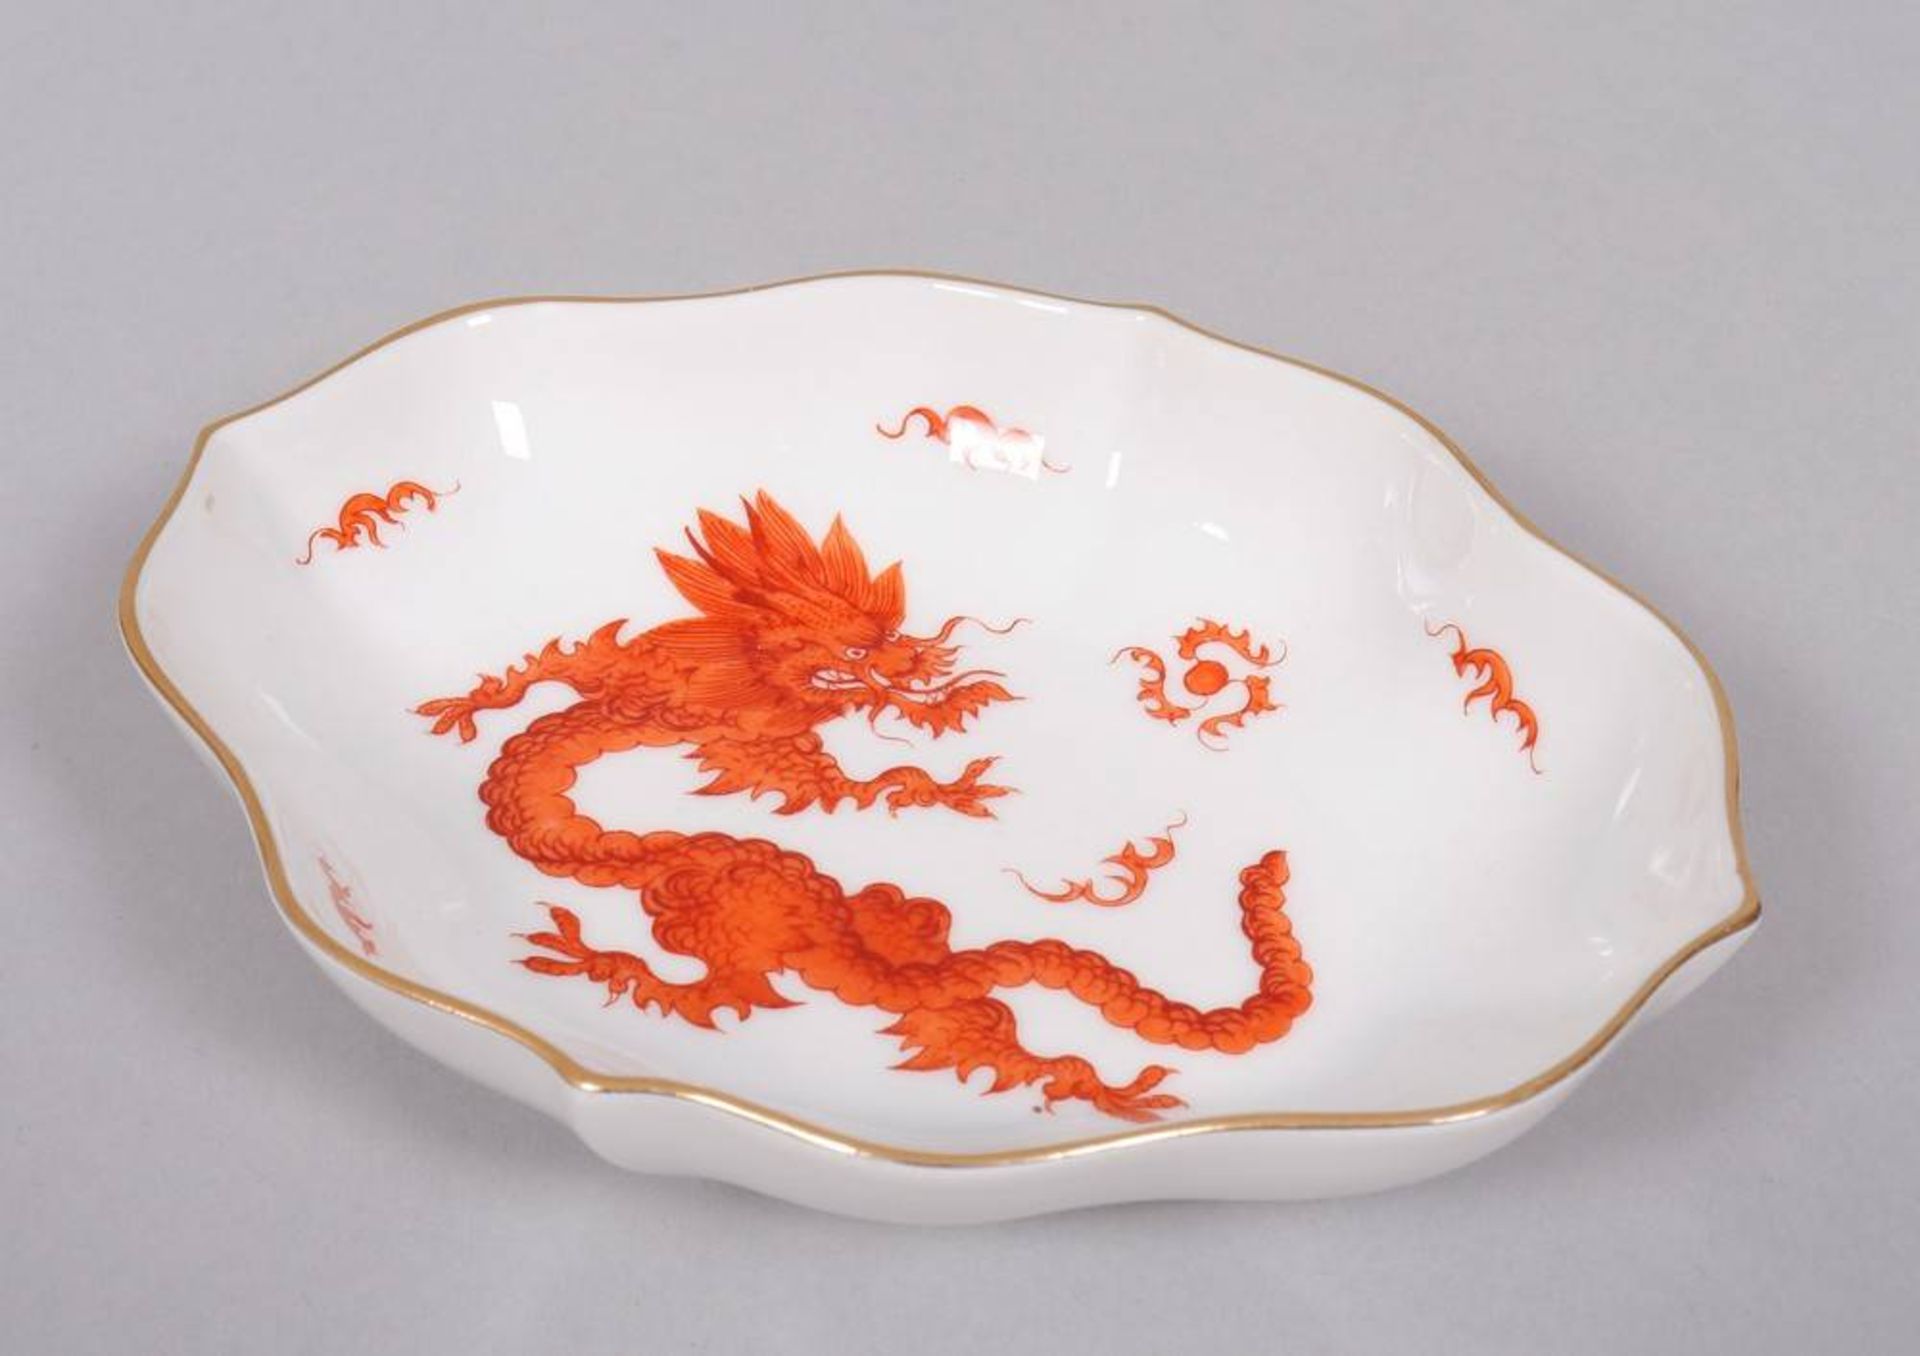 2 dishes, Meissen, mid-20th C., "Roter Drache" decor - Image 3 of 6